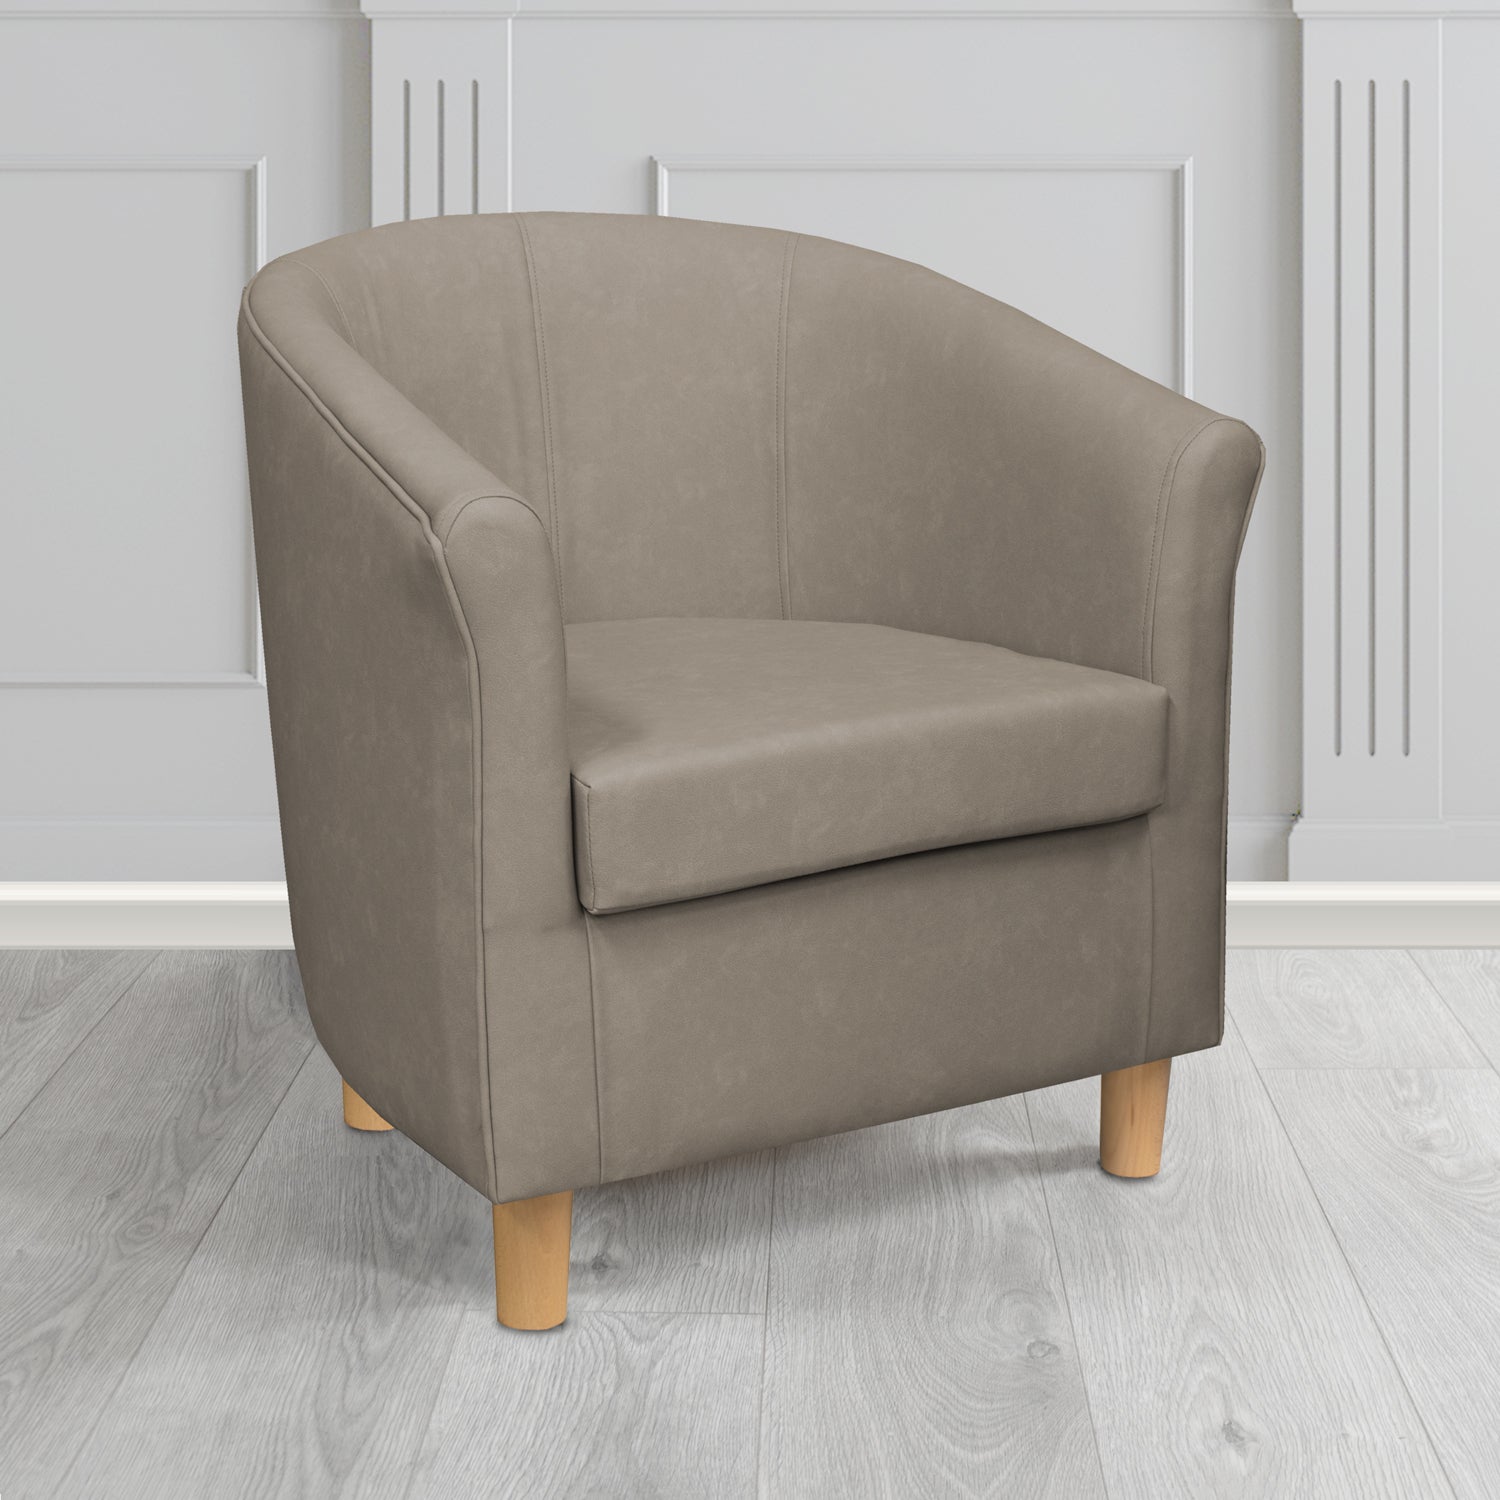 Tuscany Tub Chair in Infiniti Taupe INF1859 Antimicrobial Crib 5 Faux Leather - The Tub Chair Shop